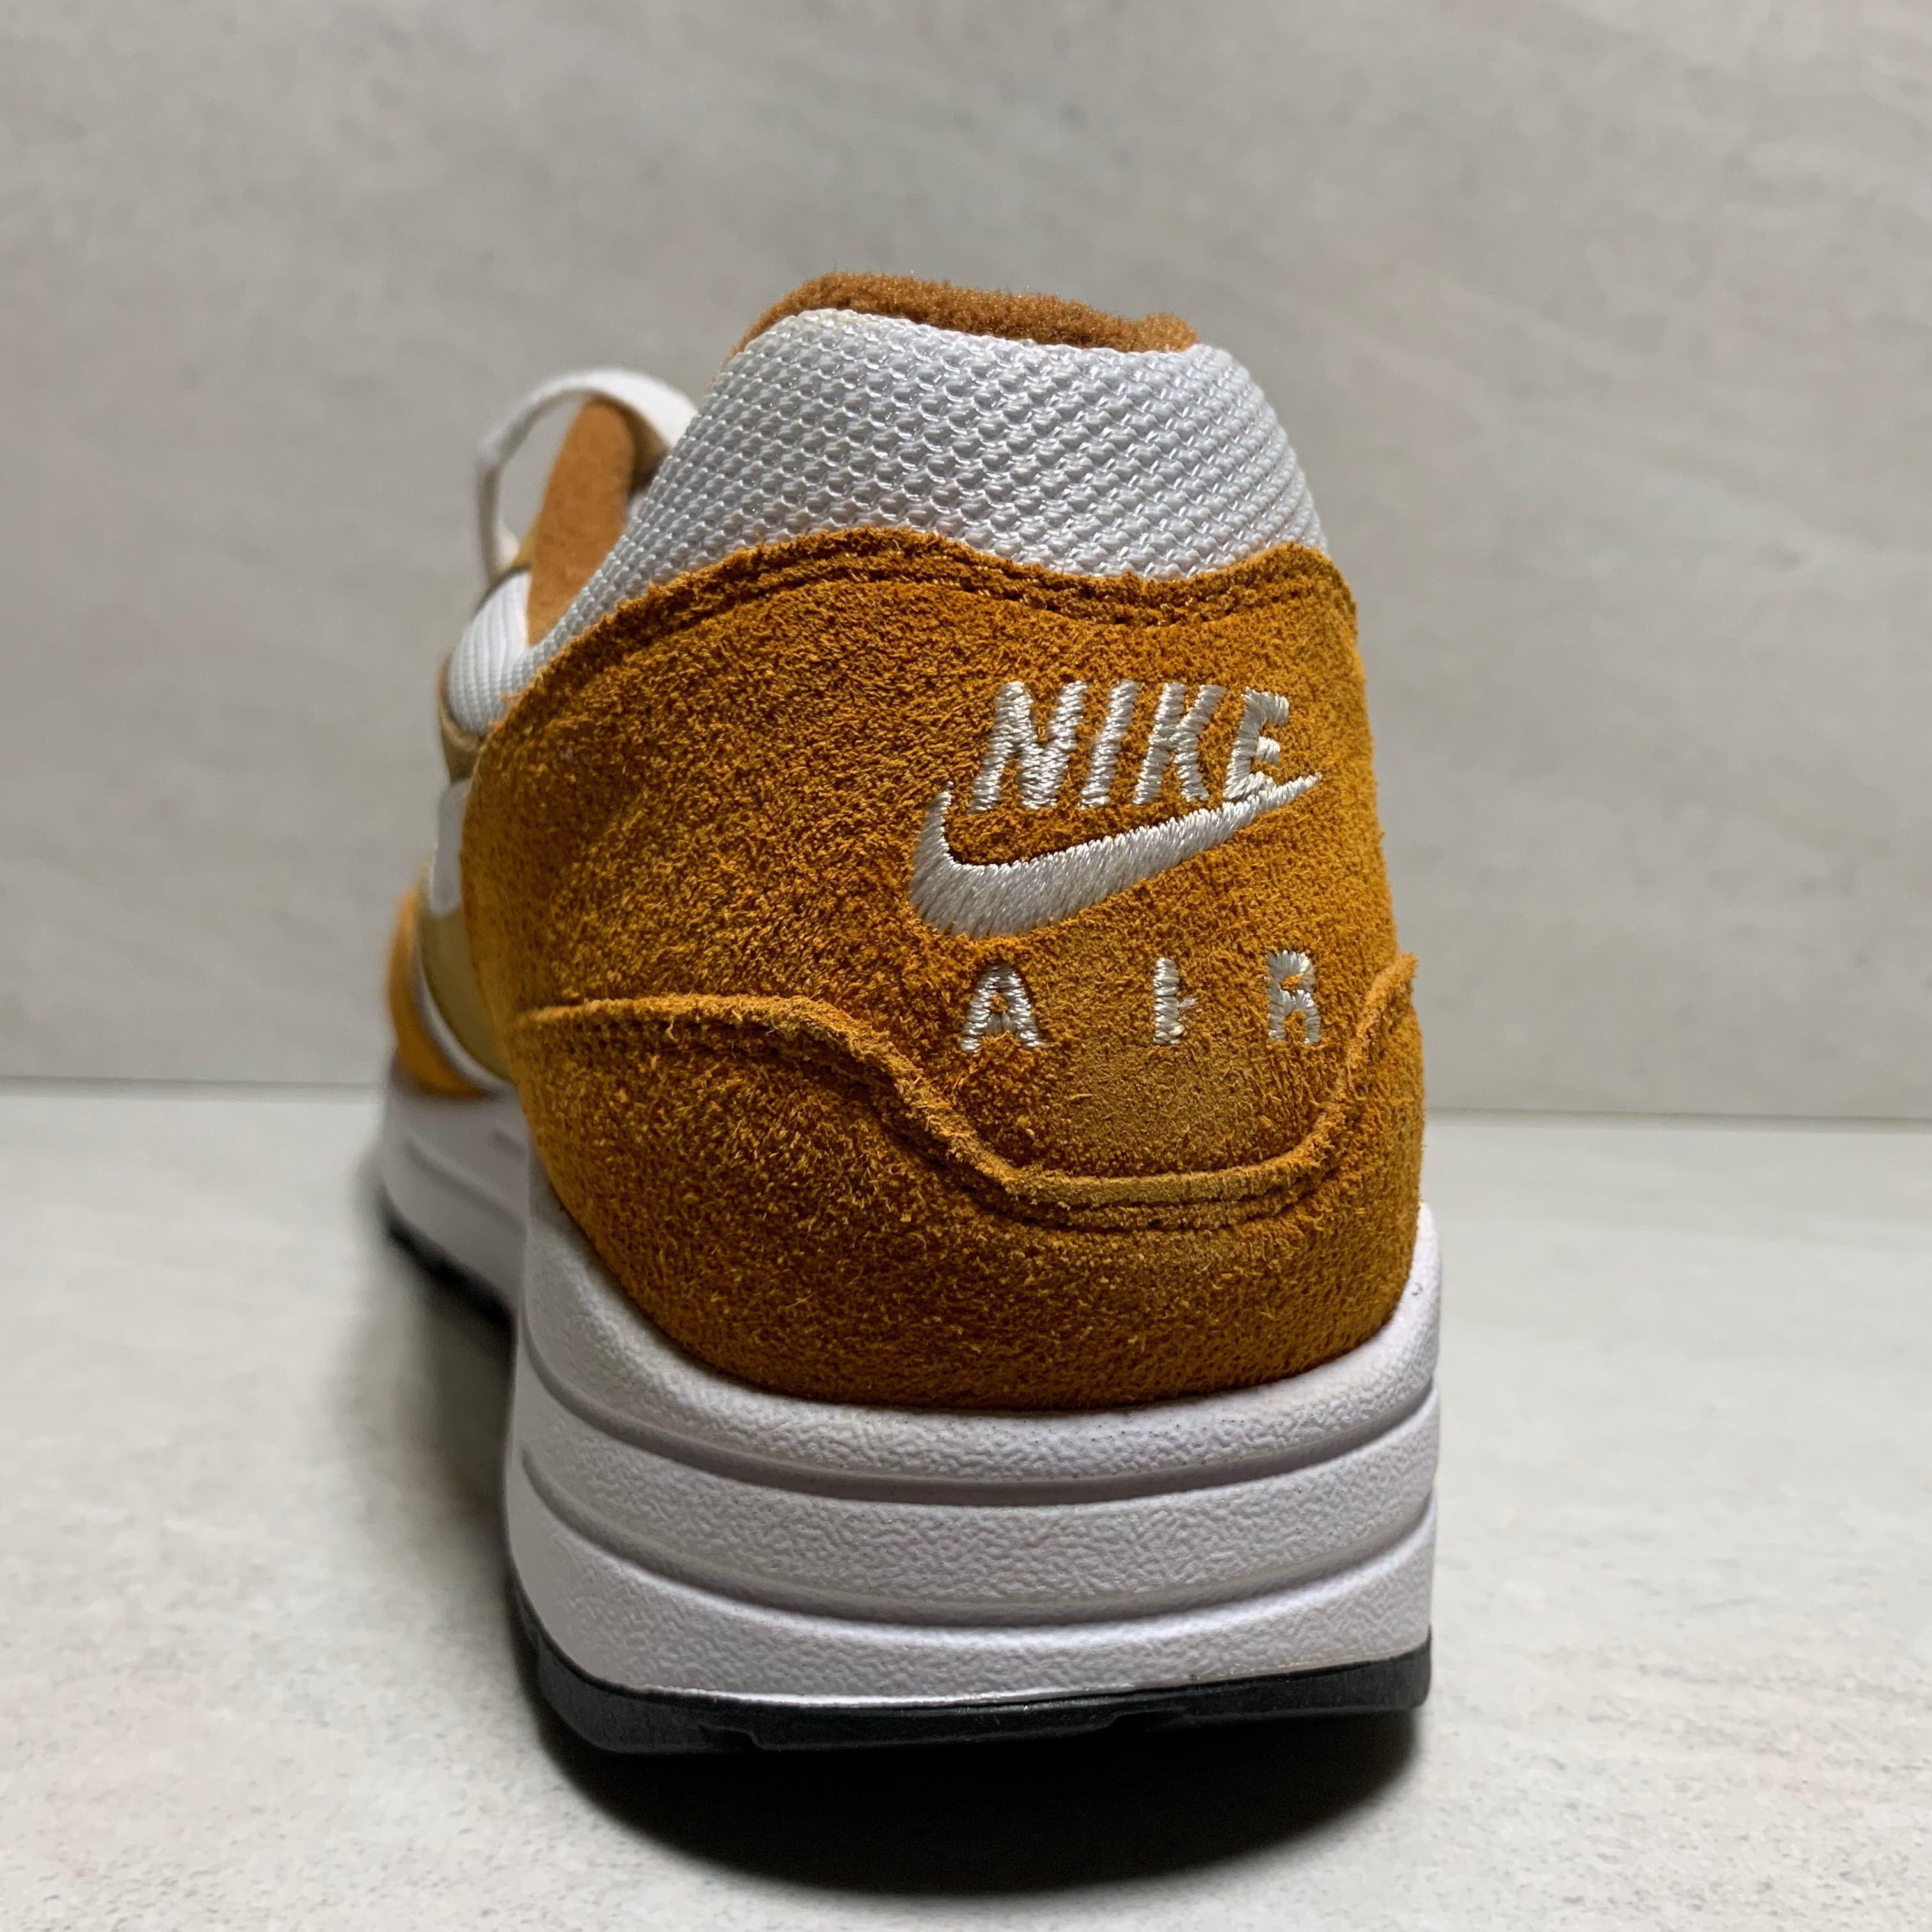 Nike Air Max 1 Size 9 Curry (2018 